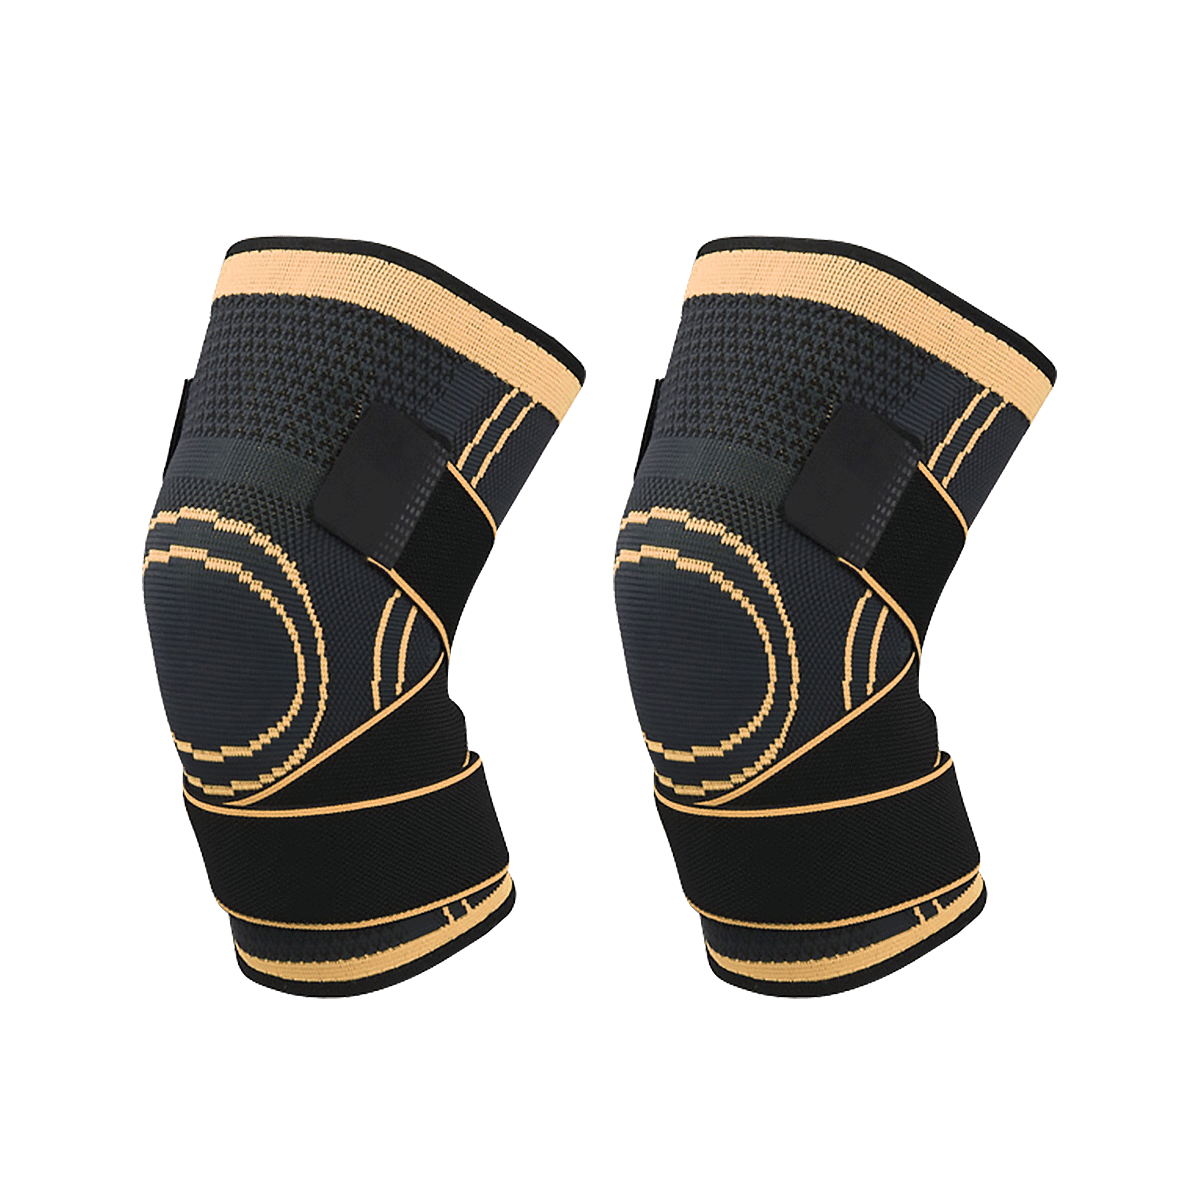 Knee Sleeve Compression Knee Pads Knee Brace Support with Adjustable Compression Straps for Joint Pain and Arthritis Relief Improved Circulation Black L 1PC 